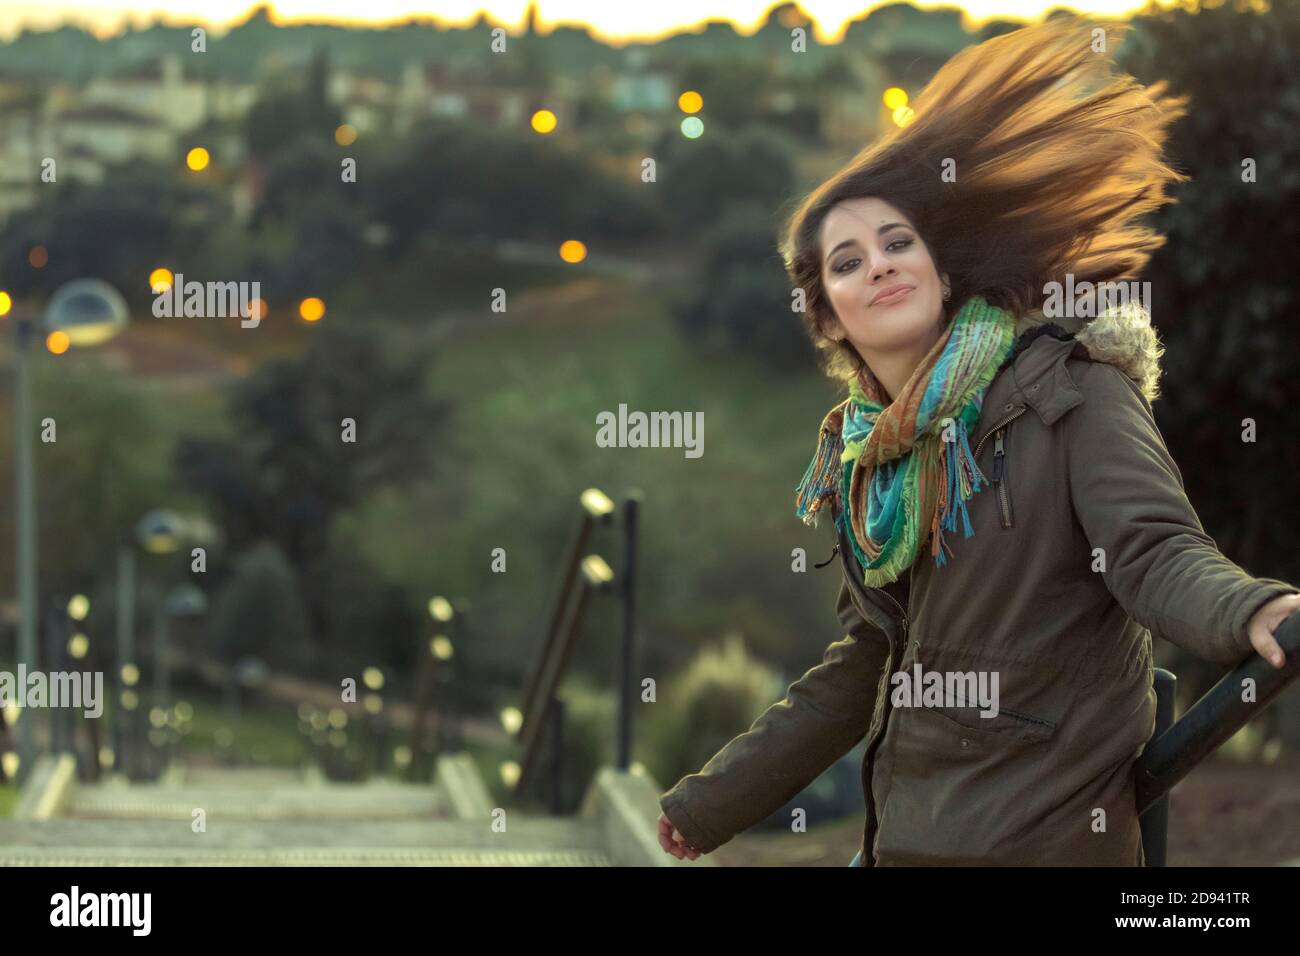 Beautiful girl with coat and long hair in the wind in a blur background Stock Photo